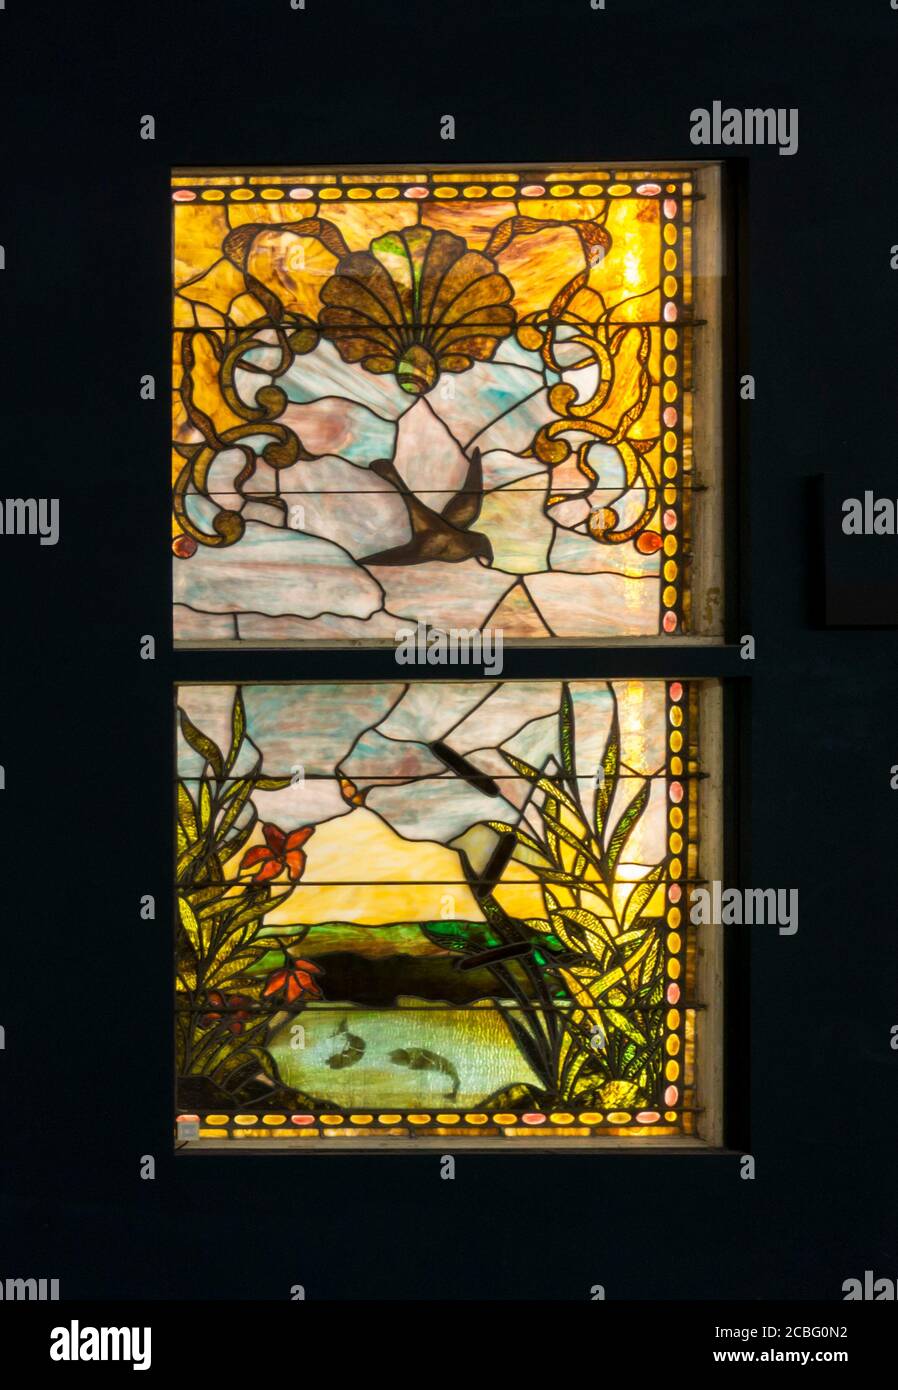 19th century American stained glass by unknown designer, showing a natural scene with fish in a lake. Displayed in Macy's Pedway, Chicago. Stock Photo